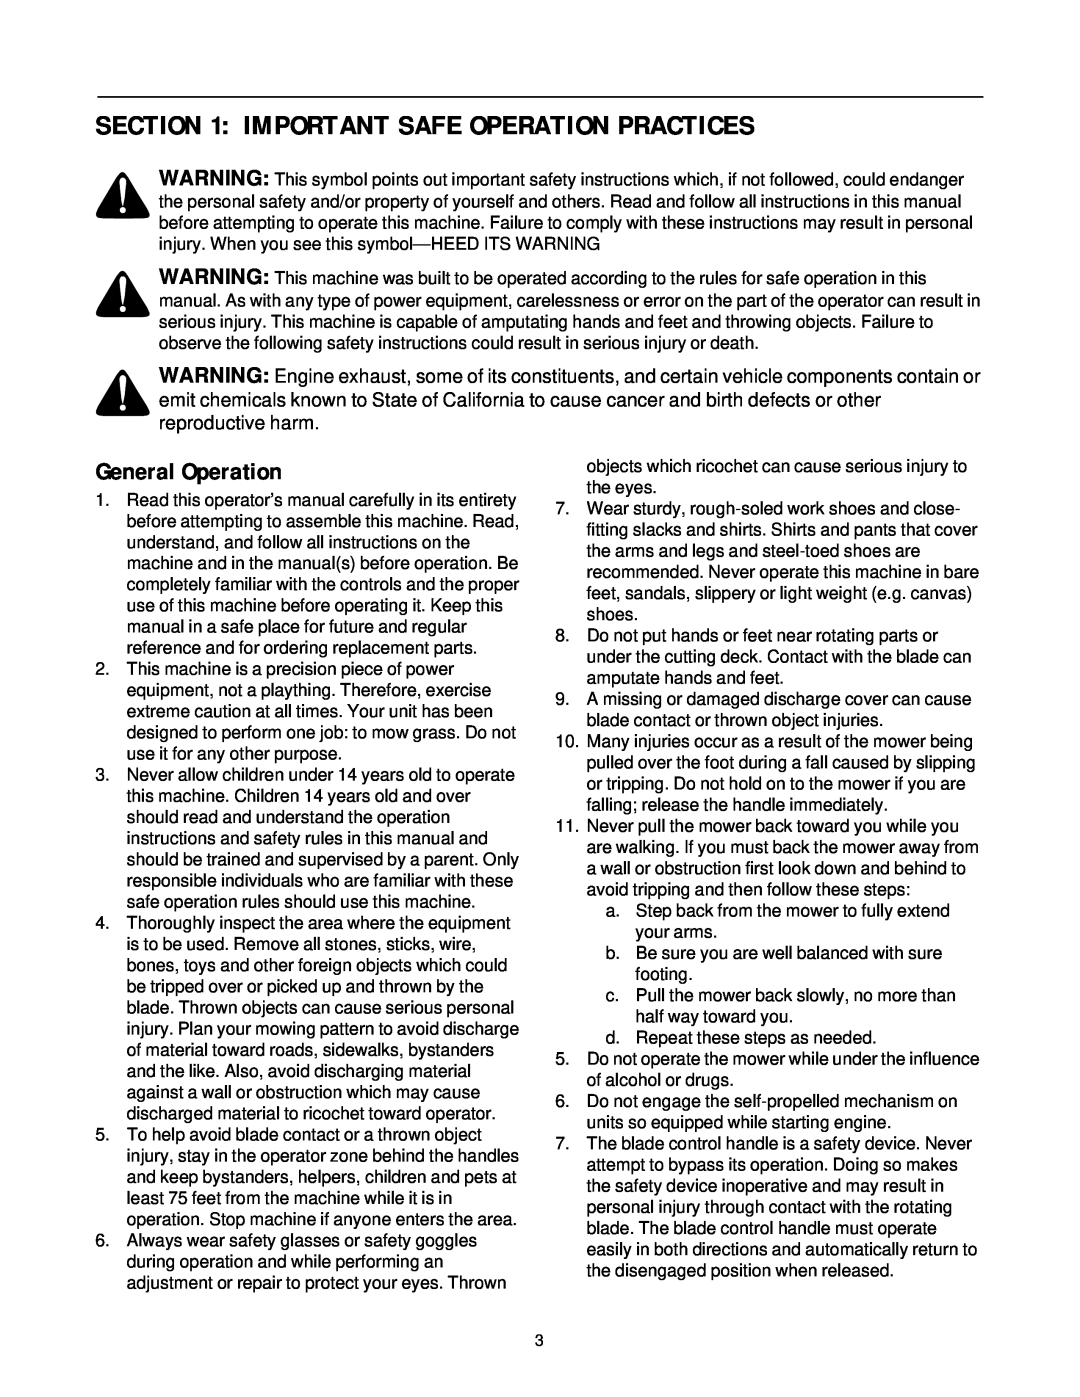 Bolens 436 manual Important Safe Operation Practices, General Operation 